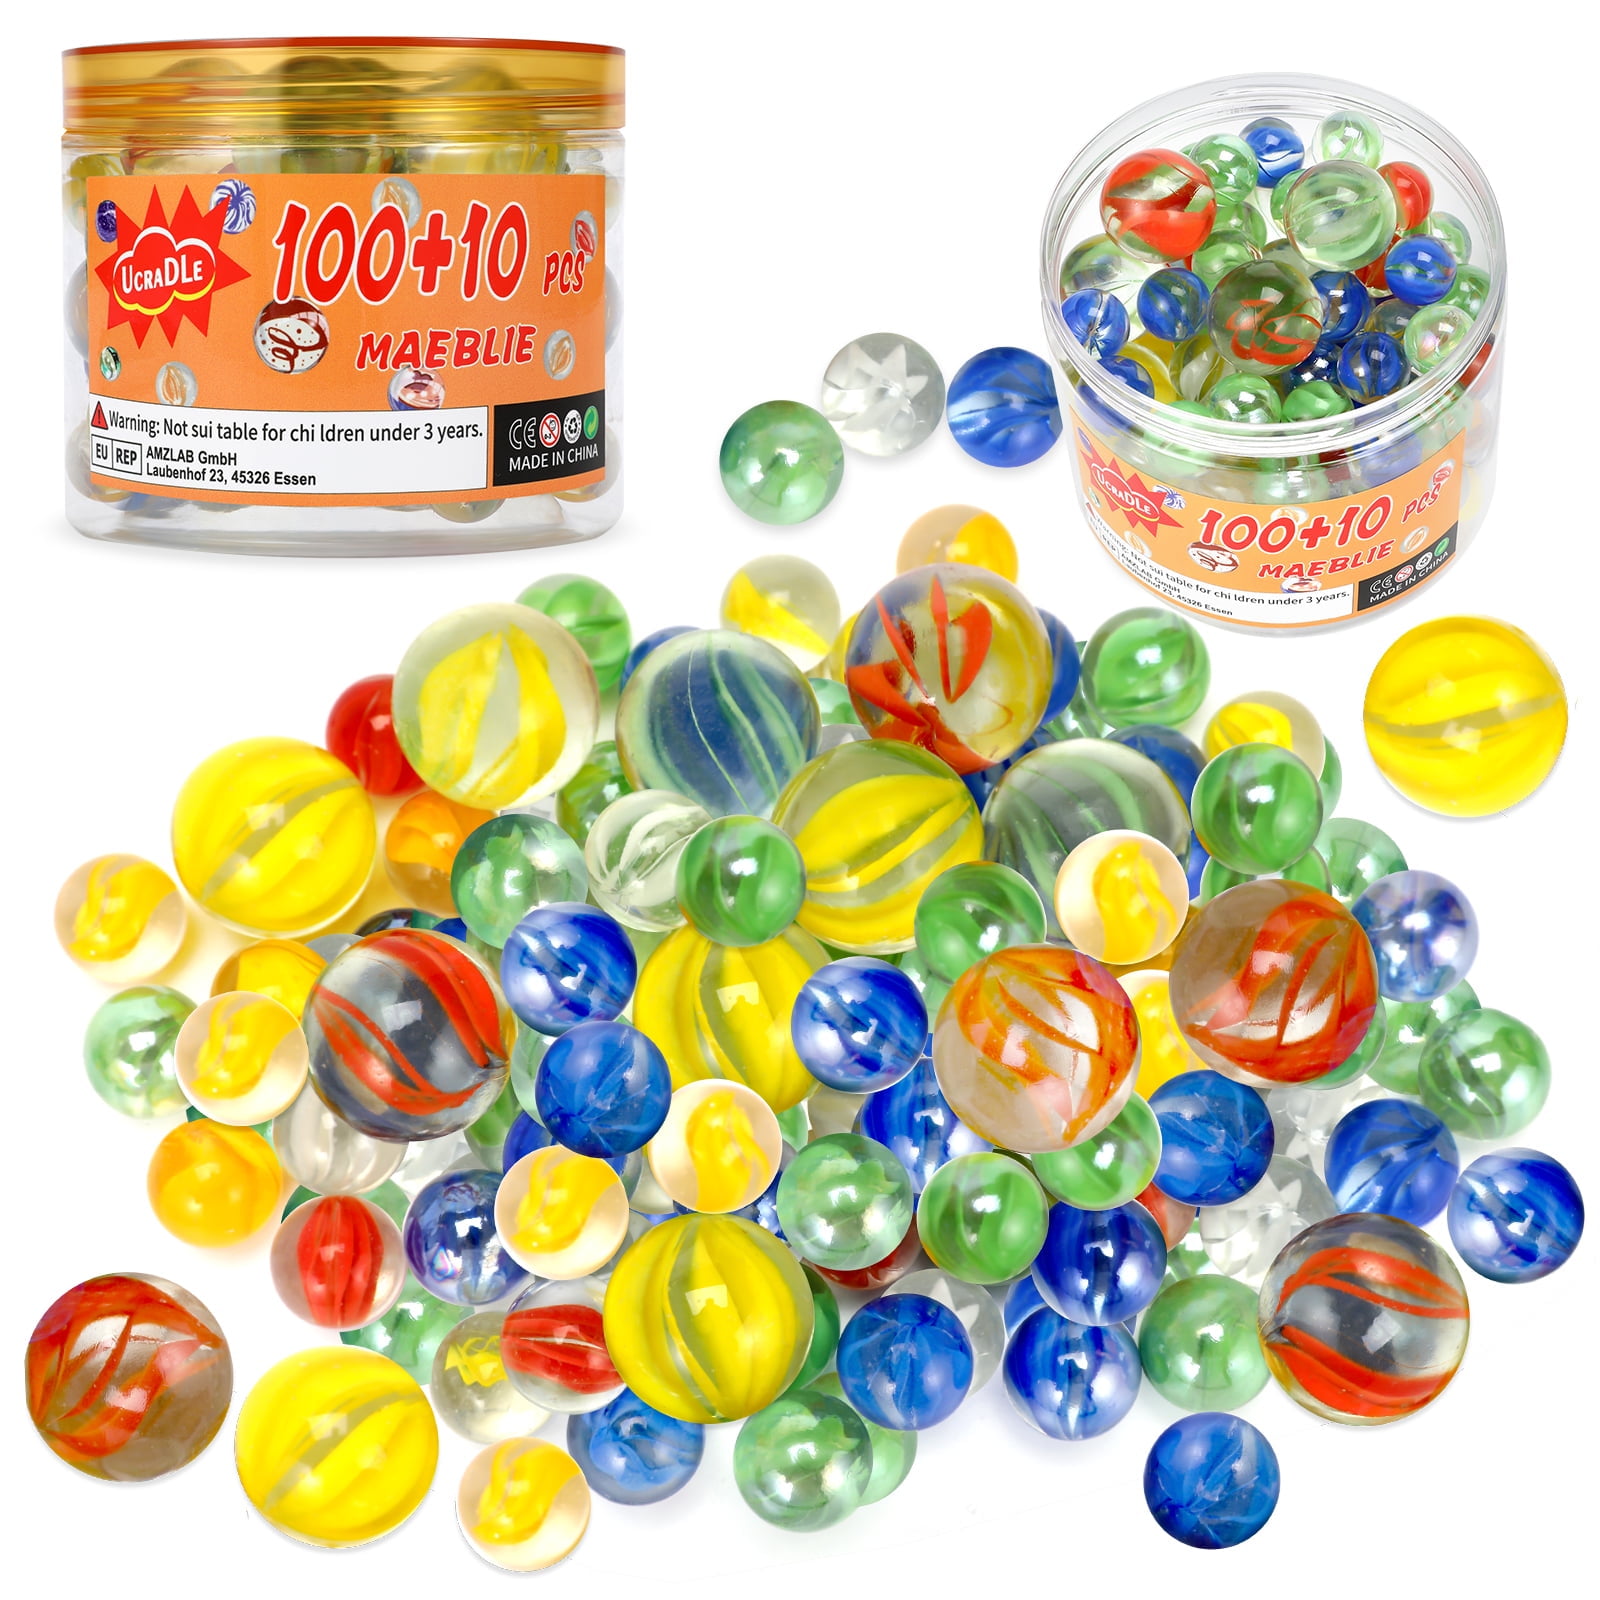 40 PCS Marbles Bulk Assorted Colors Glass Marbles, Cat Eyes Round Marbles  Toy for Kids Marble Games, DIY and Home Decoration